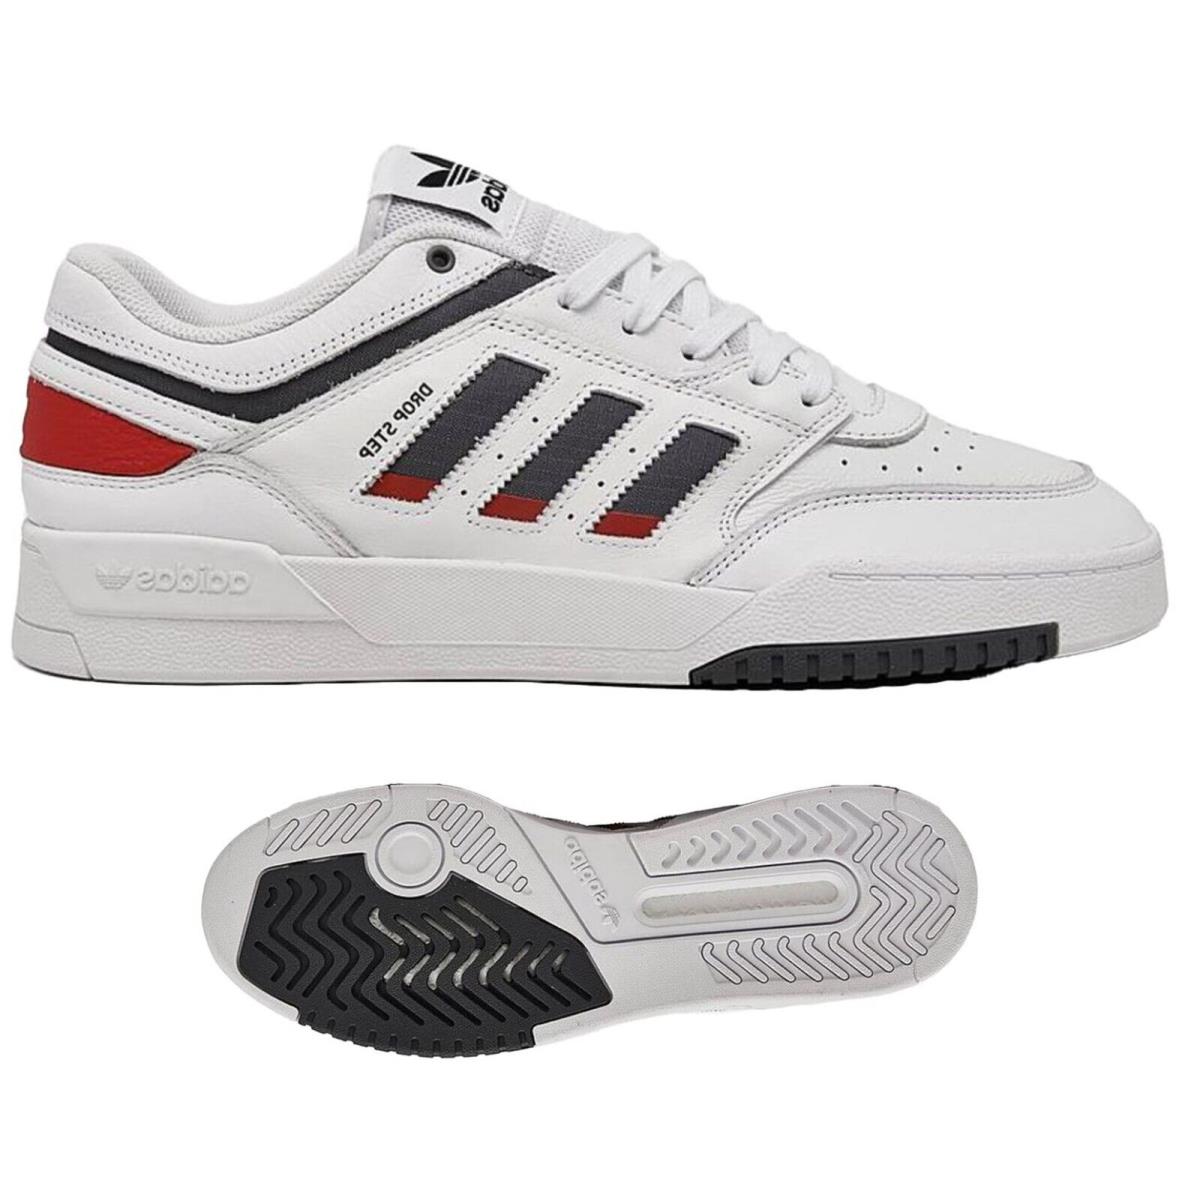 Adidas Drop Step Team Usa Mens Leather Low Top Athletic Sneaker All Sizes